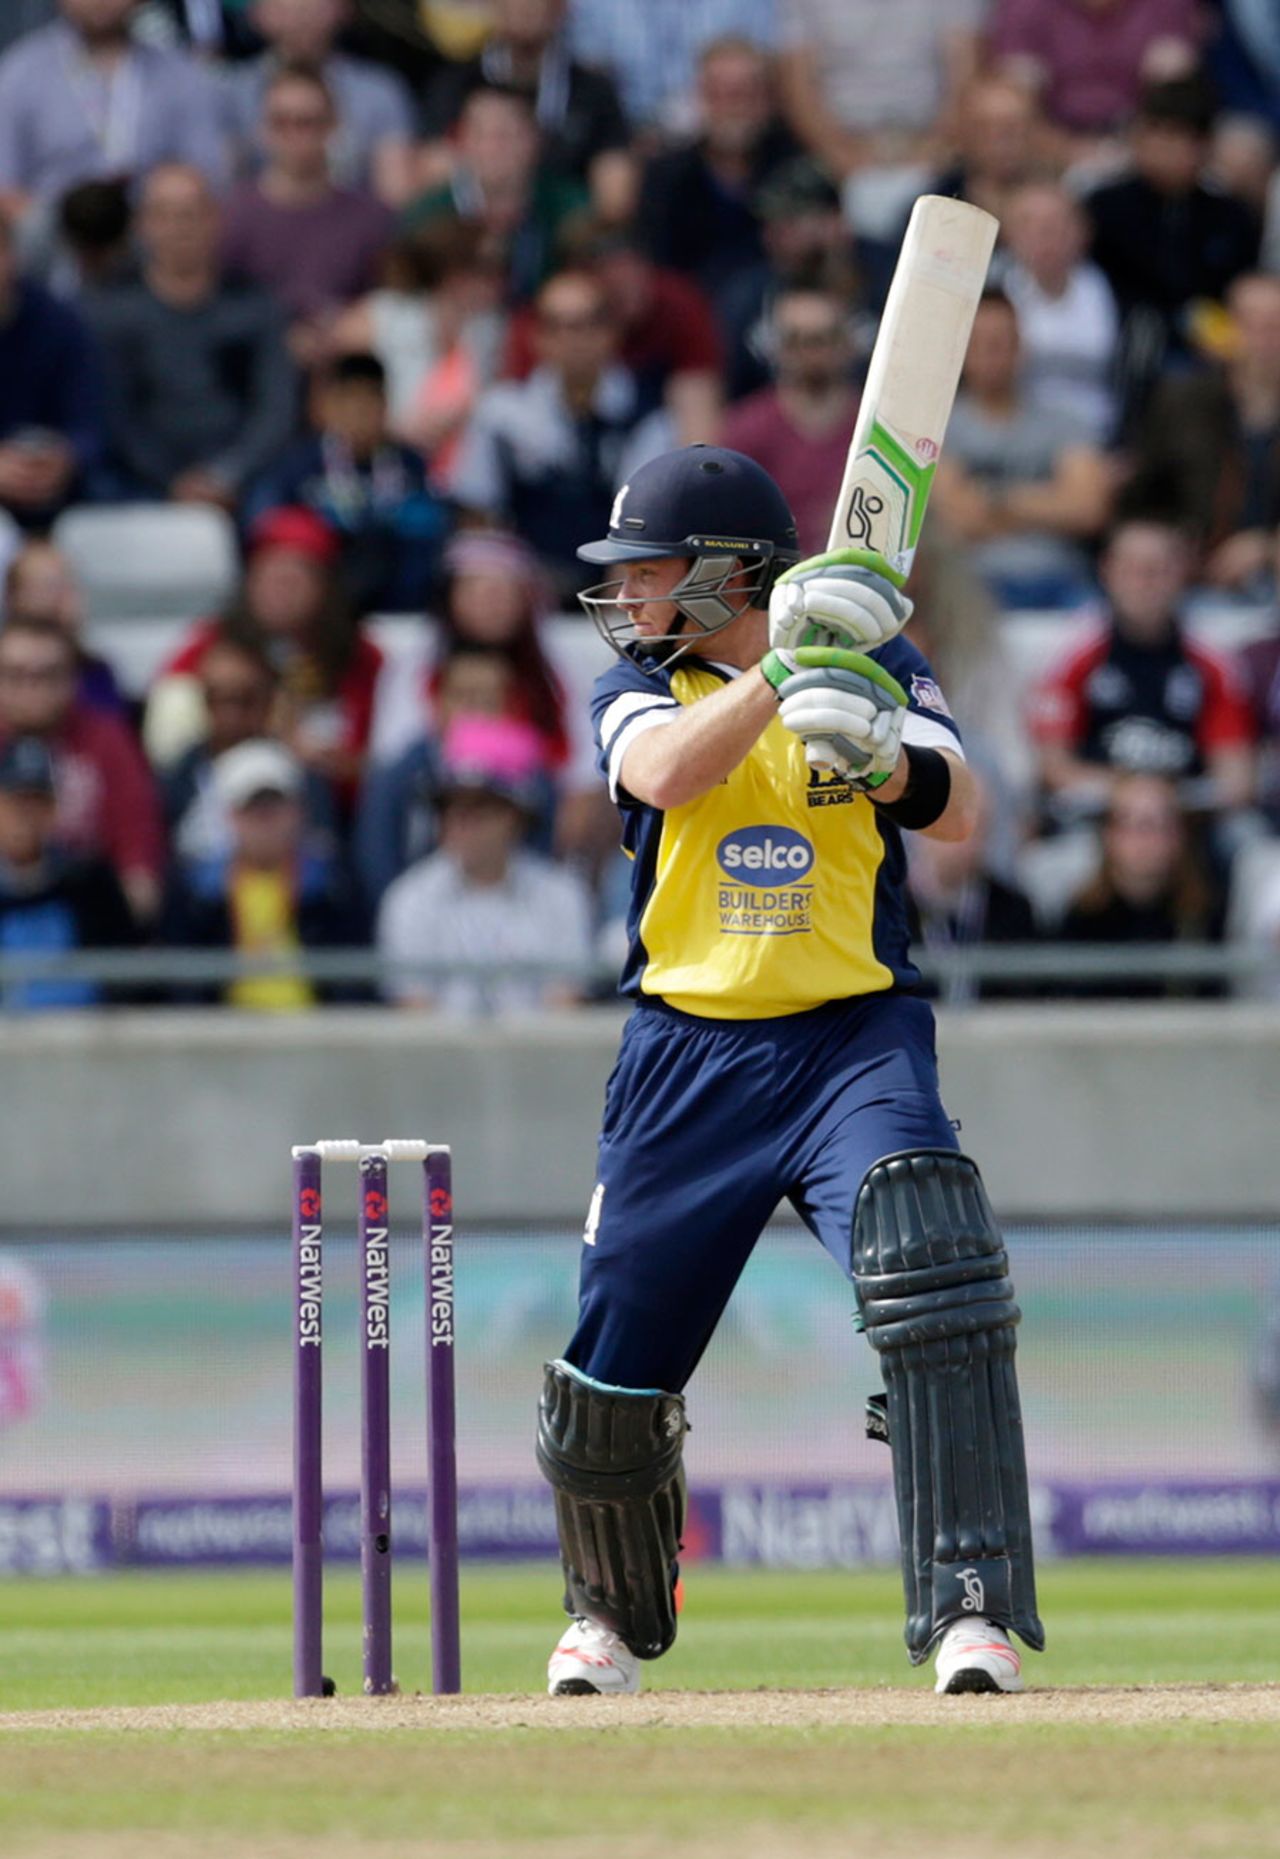 Ian Bell in action during Warwickshire's T20 Blast semi-final against Northamptonshire, August 29, 2015